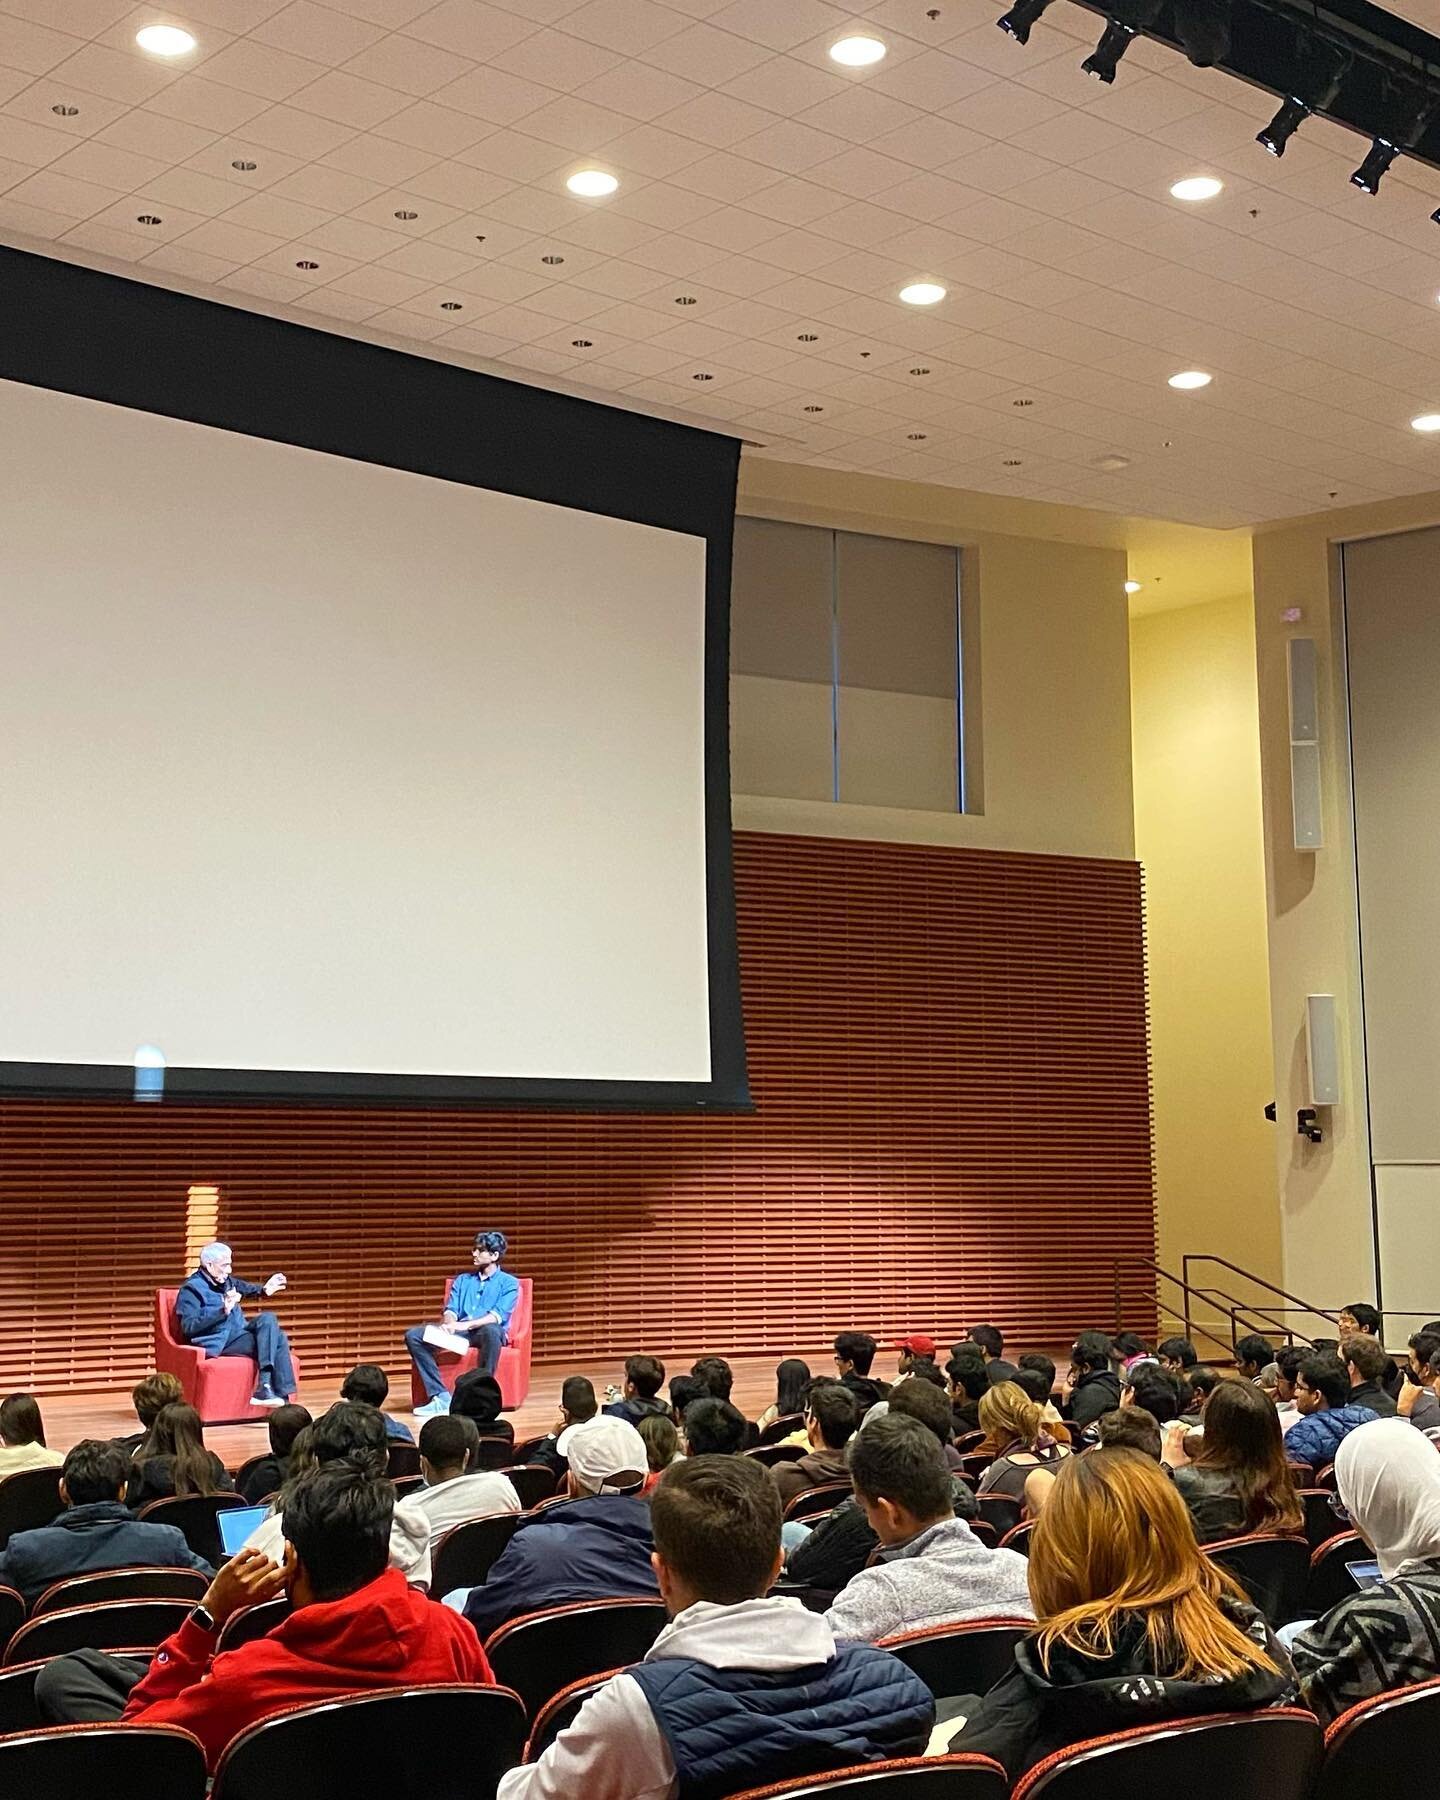 It was truly an honor to host a fireside chat with Vinod Khosla tonight! We learned so much from Vinod&rsquo;s unmatched curiosity and insights into entrepreneurship and investment. Thank you so much to Vinod and @khoslaventures for coming to campus!